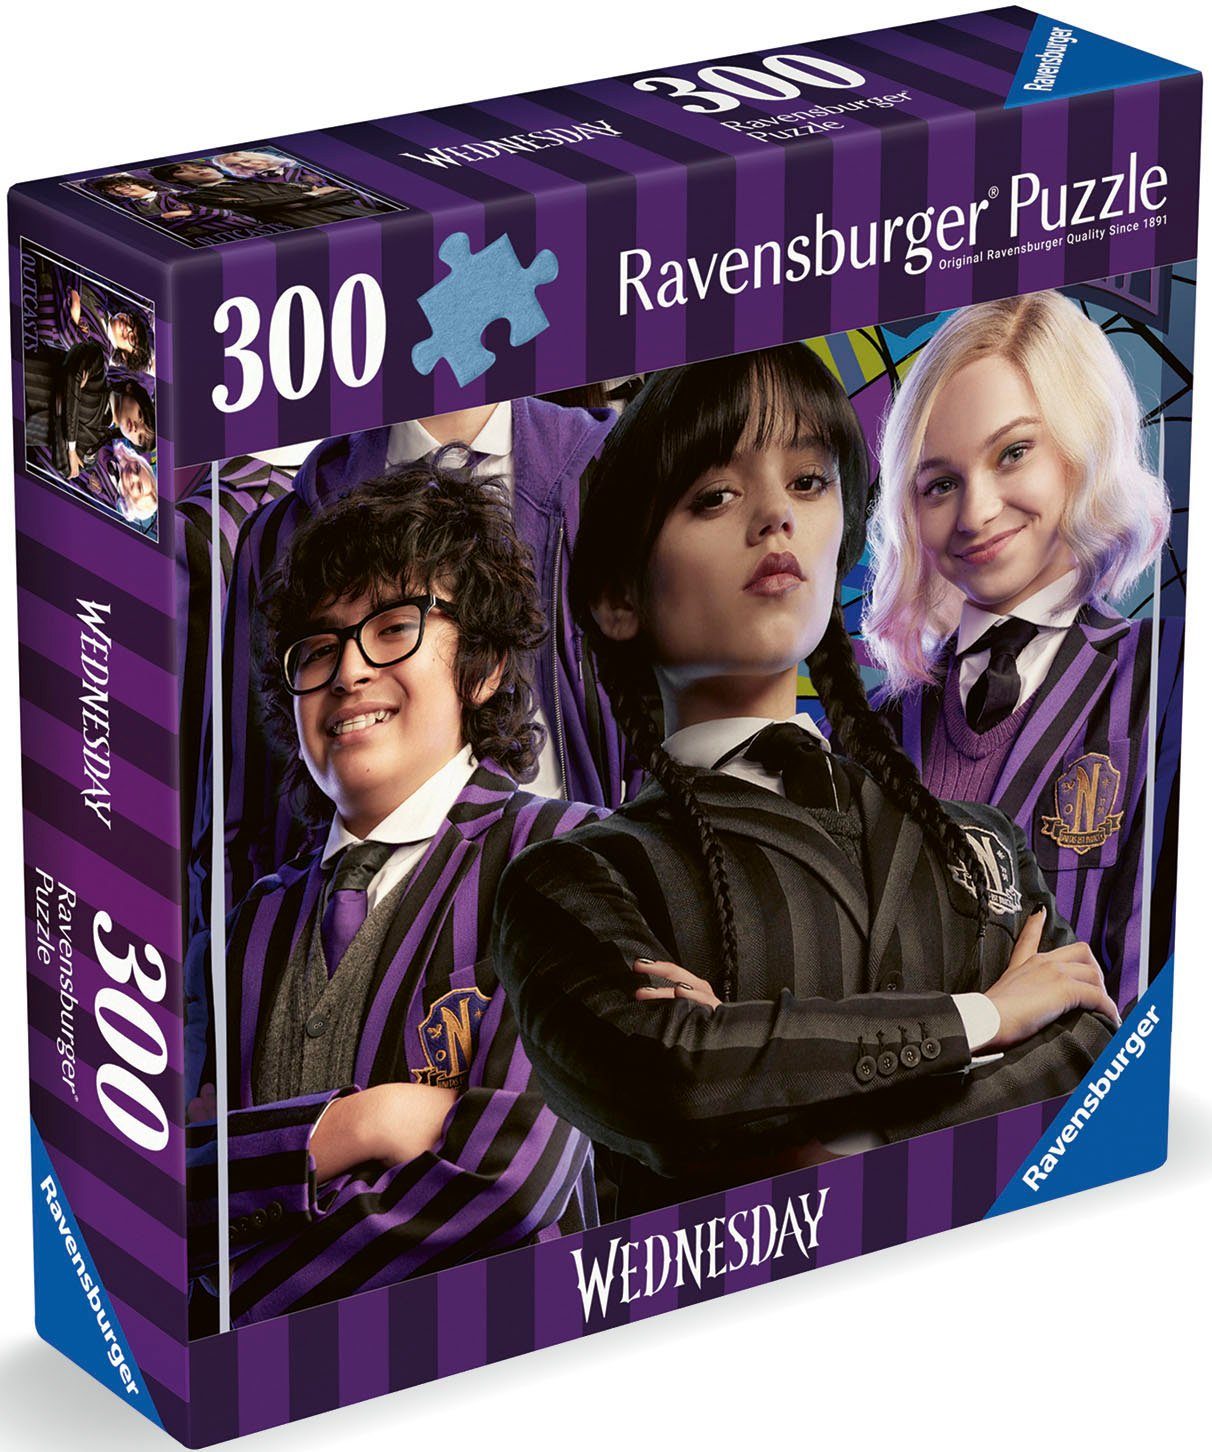 in Puzzleteile, Wednesday, are Puzzle 300 Europe Made Outcasts in, Ravensburger